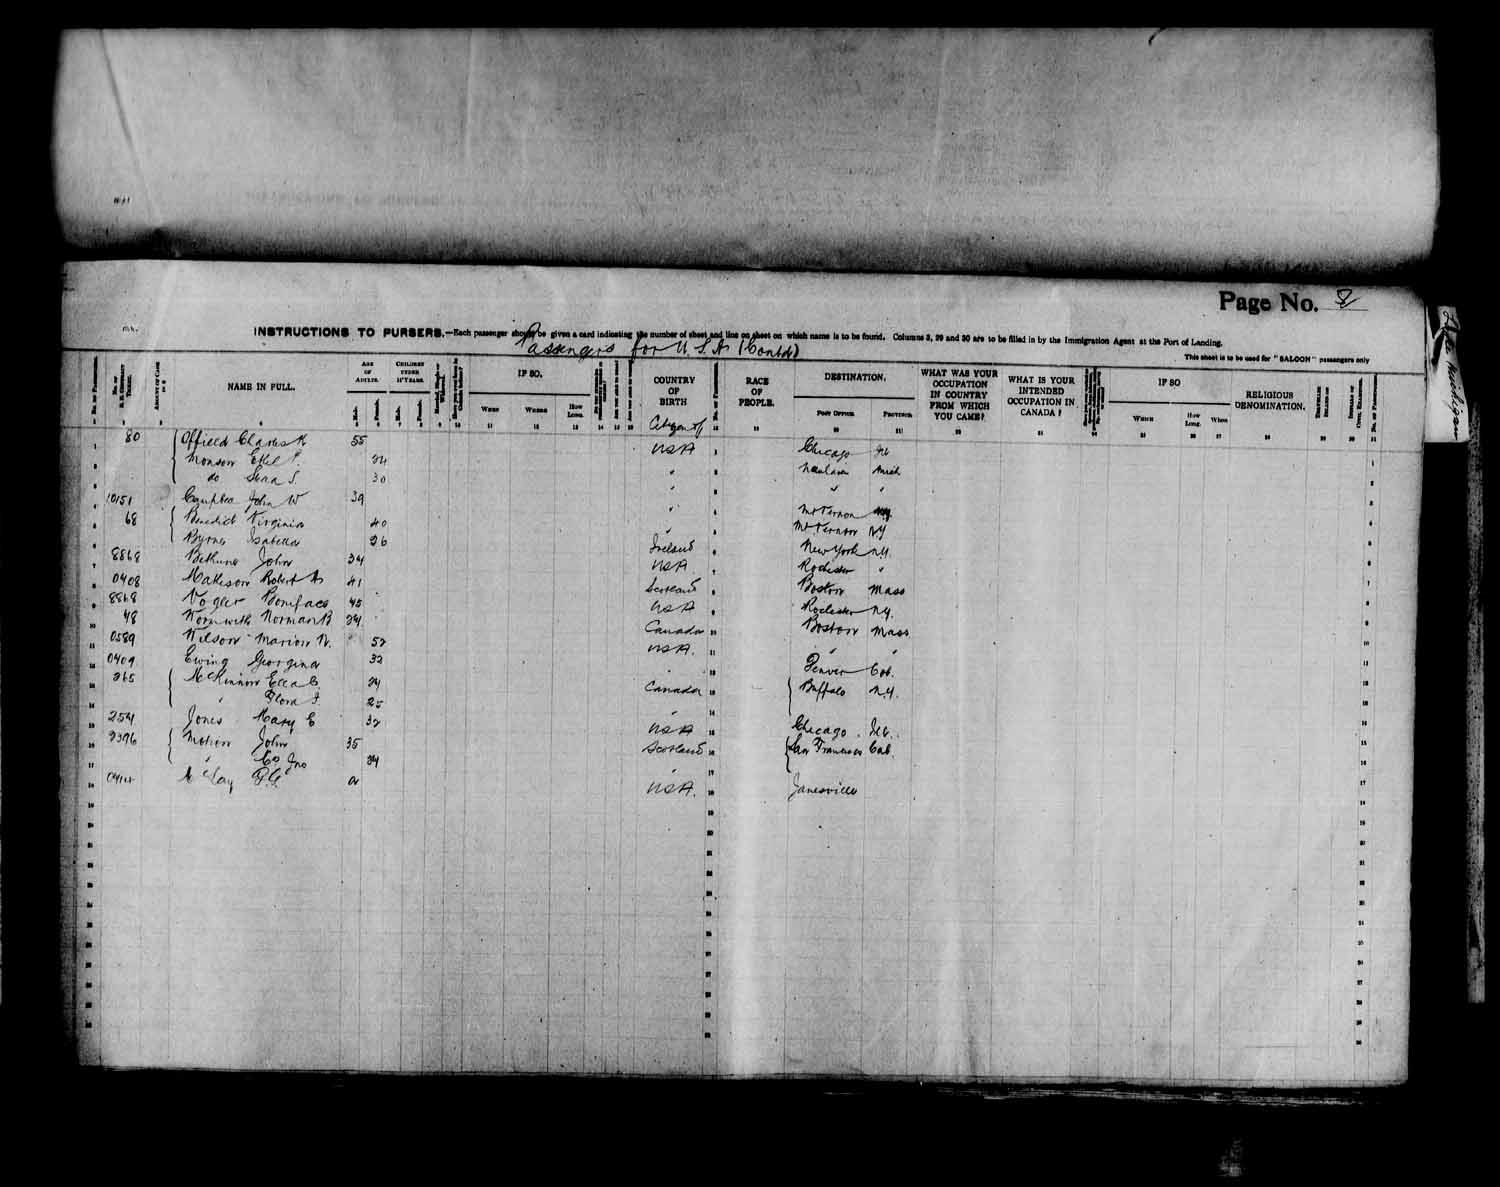 Digitized page of Passenger Lists for Image No.: e003566511